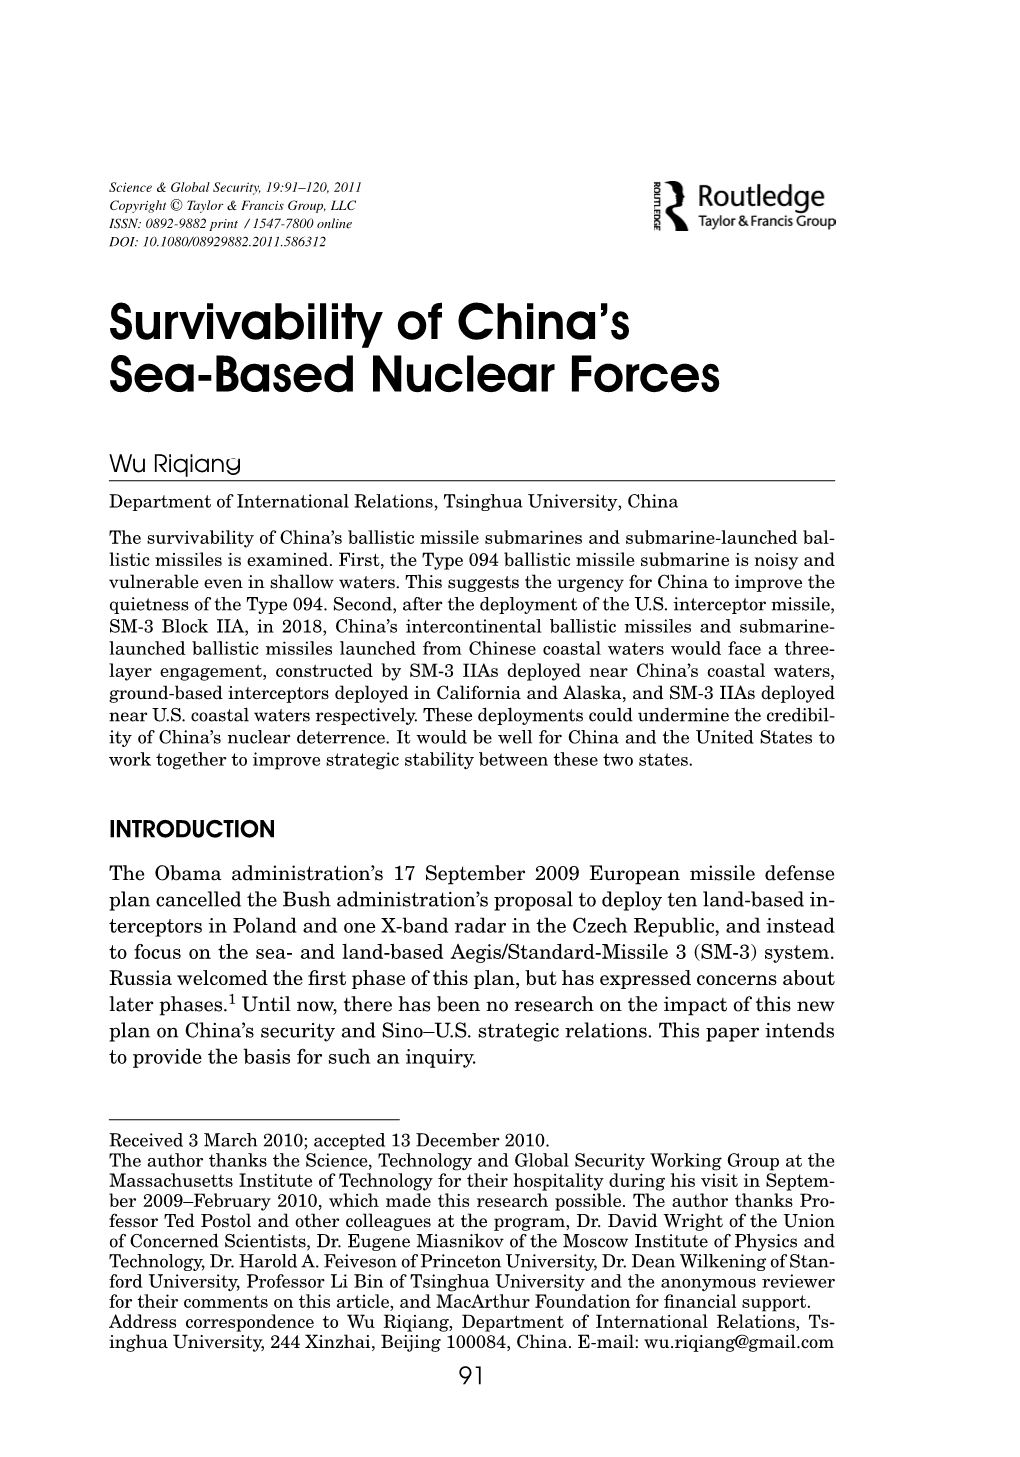 Survivability of China's Sea-Based Nuclear Forces